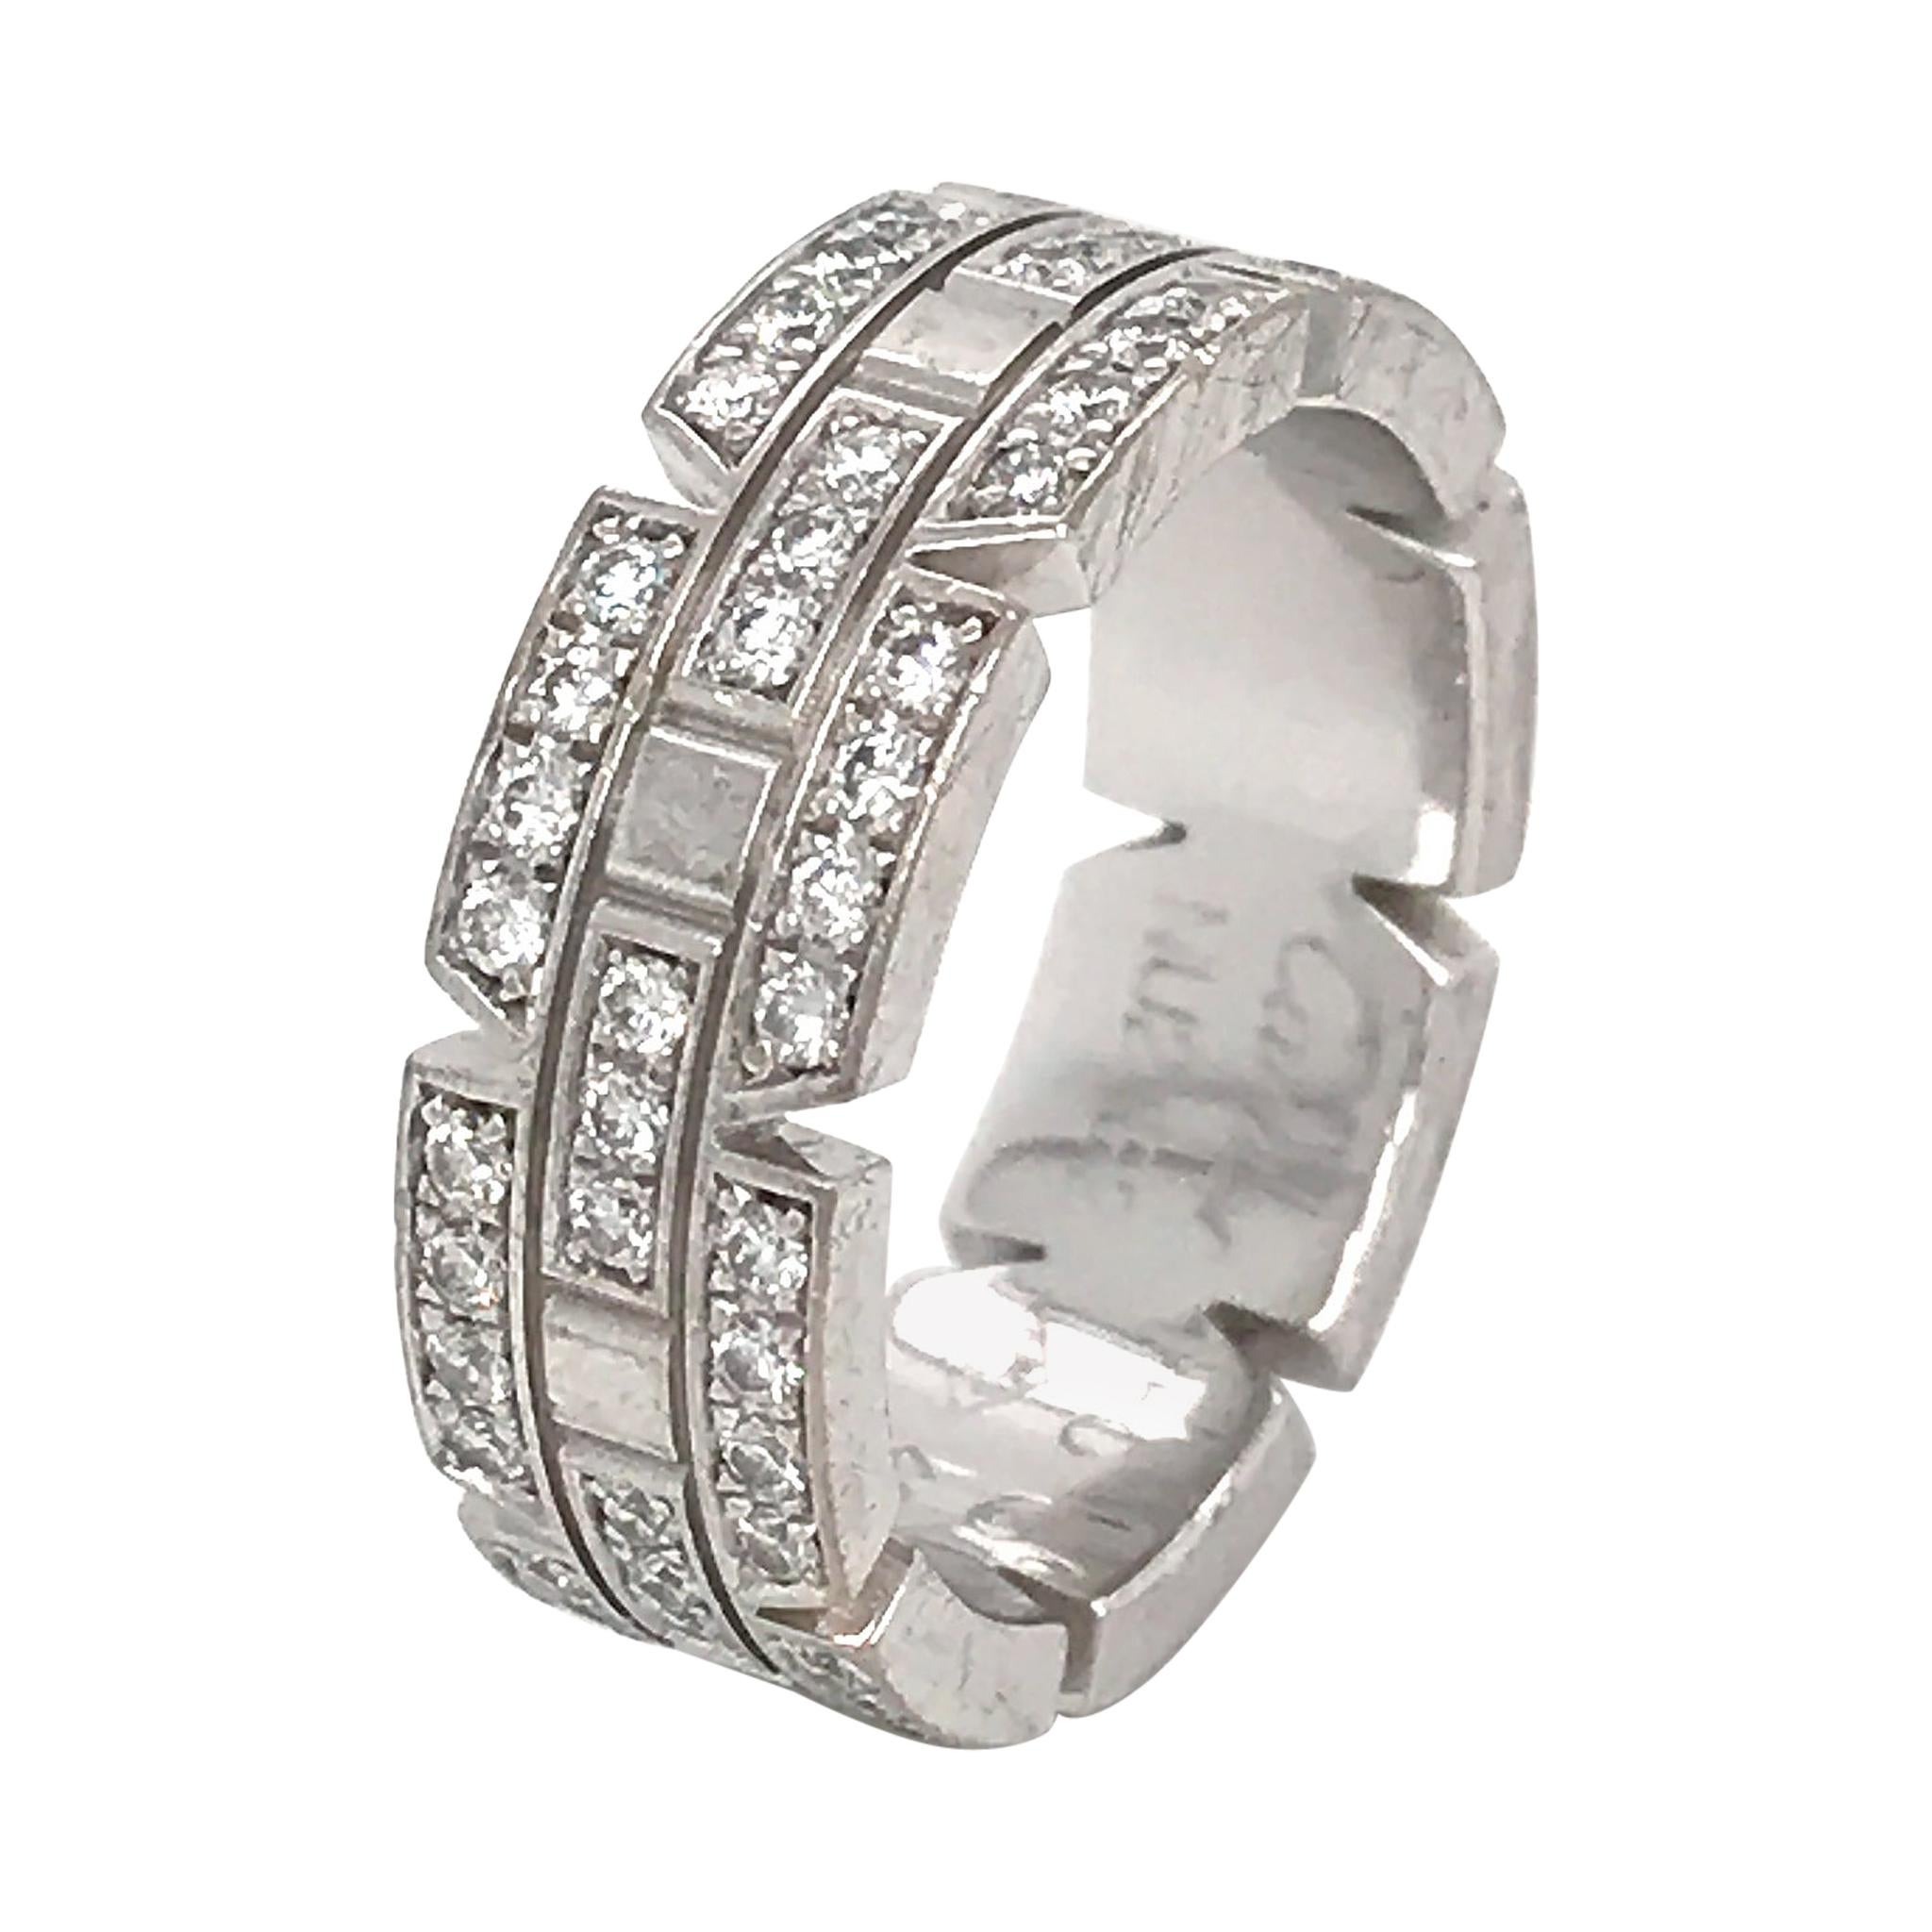 Cartier Tank Francaise Diamond Ring in White Gold